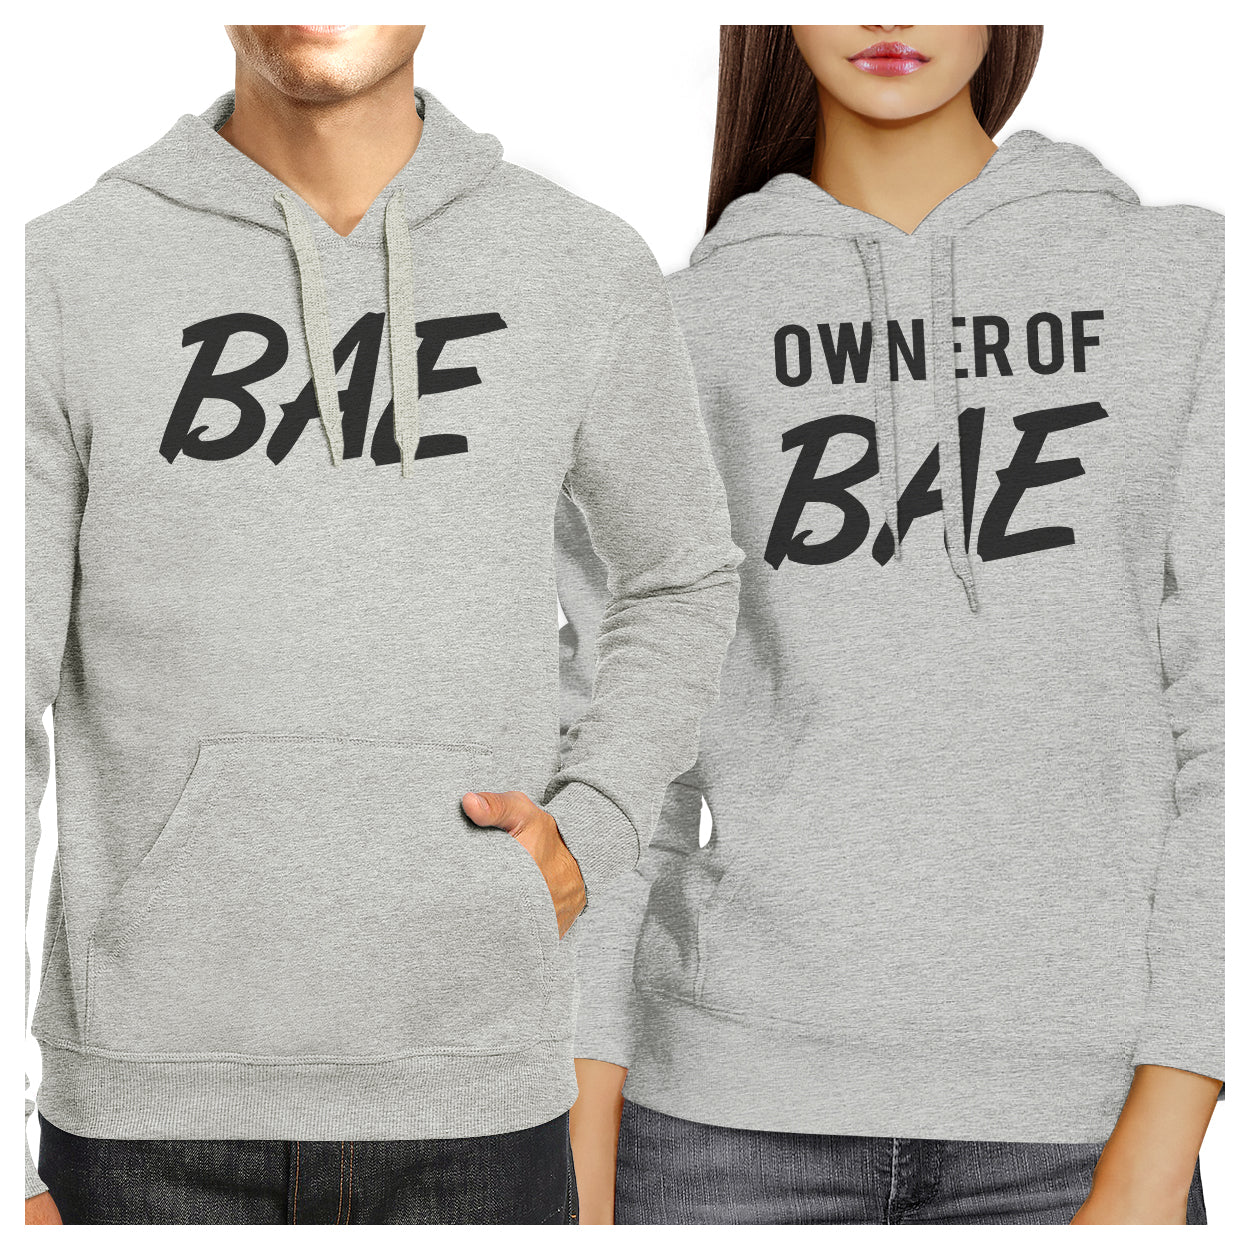 Bae And Owner Of Bae Matching Couple Grey Hoodie